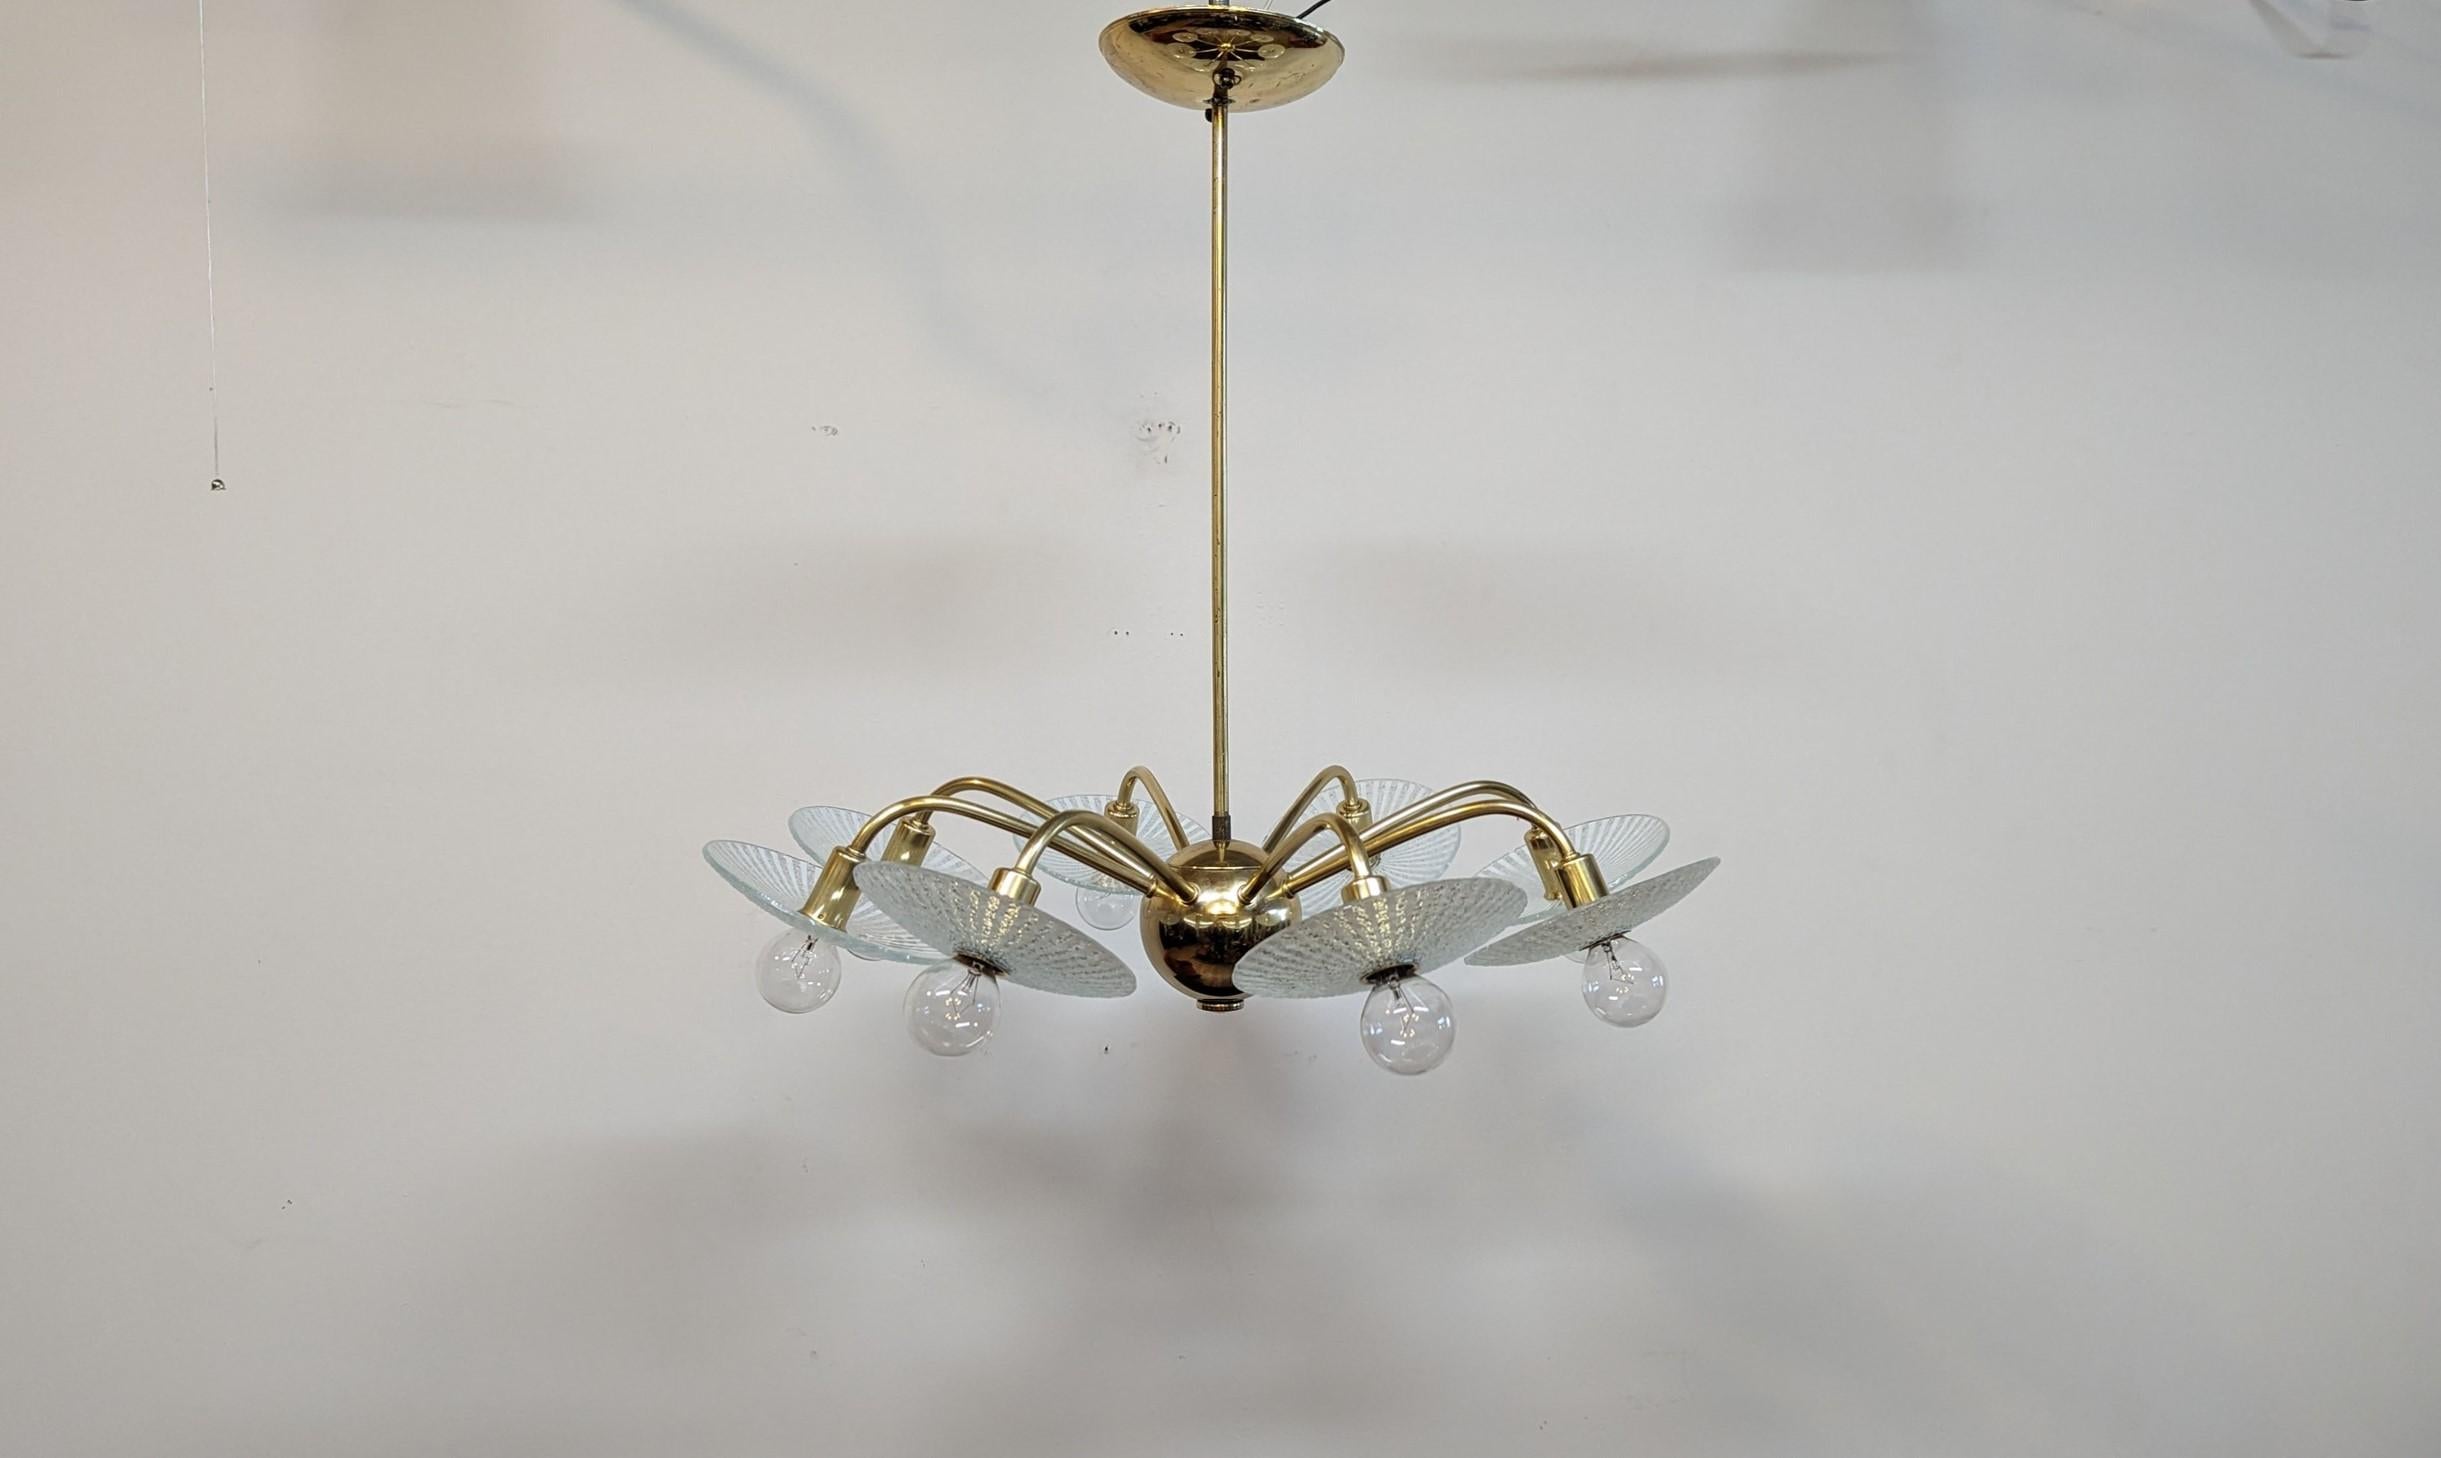 Brass Mid Century Modern Chandelier.  Mid Century Brass Sputnik eight arm chandelier with glass diffusers in the style of Lightolier.  The glass diffusers are reverse painted with tapering white lines on the backside.  The front sides of the glass